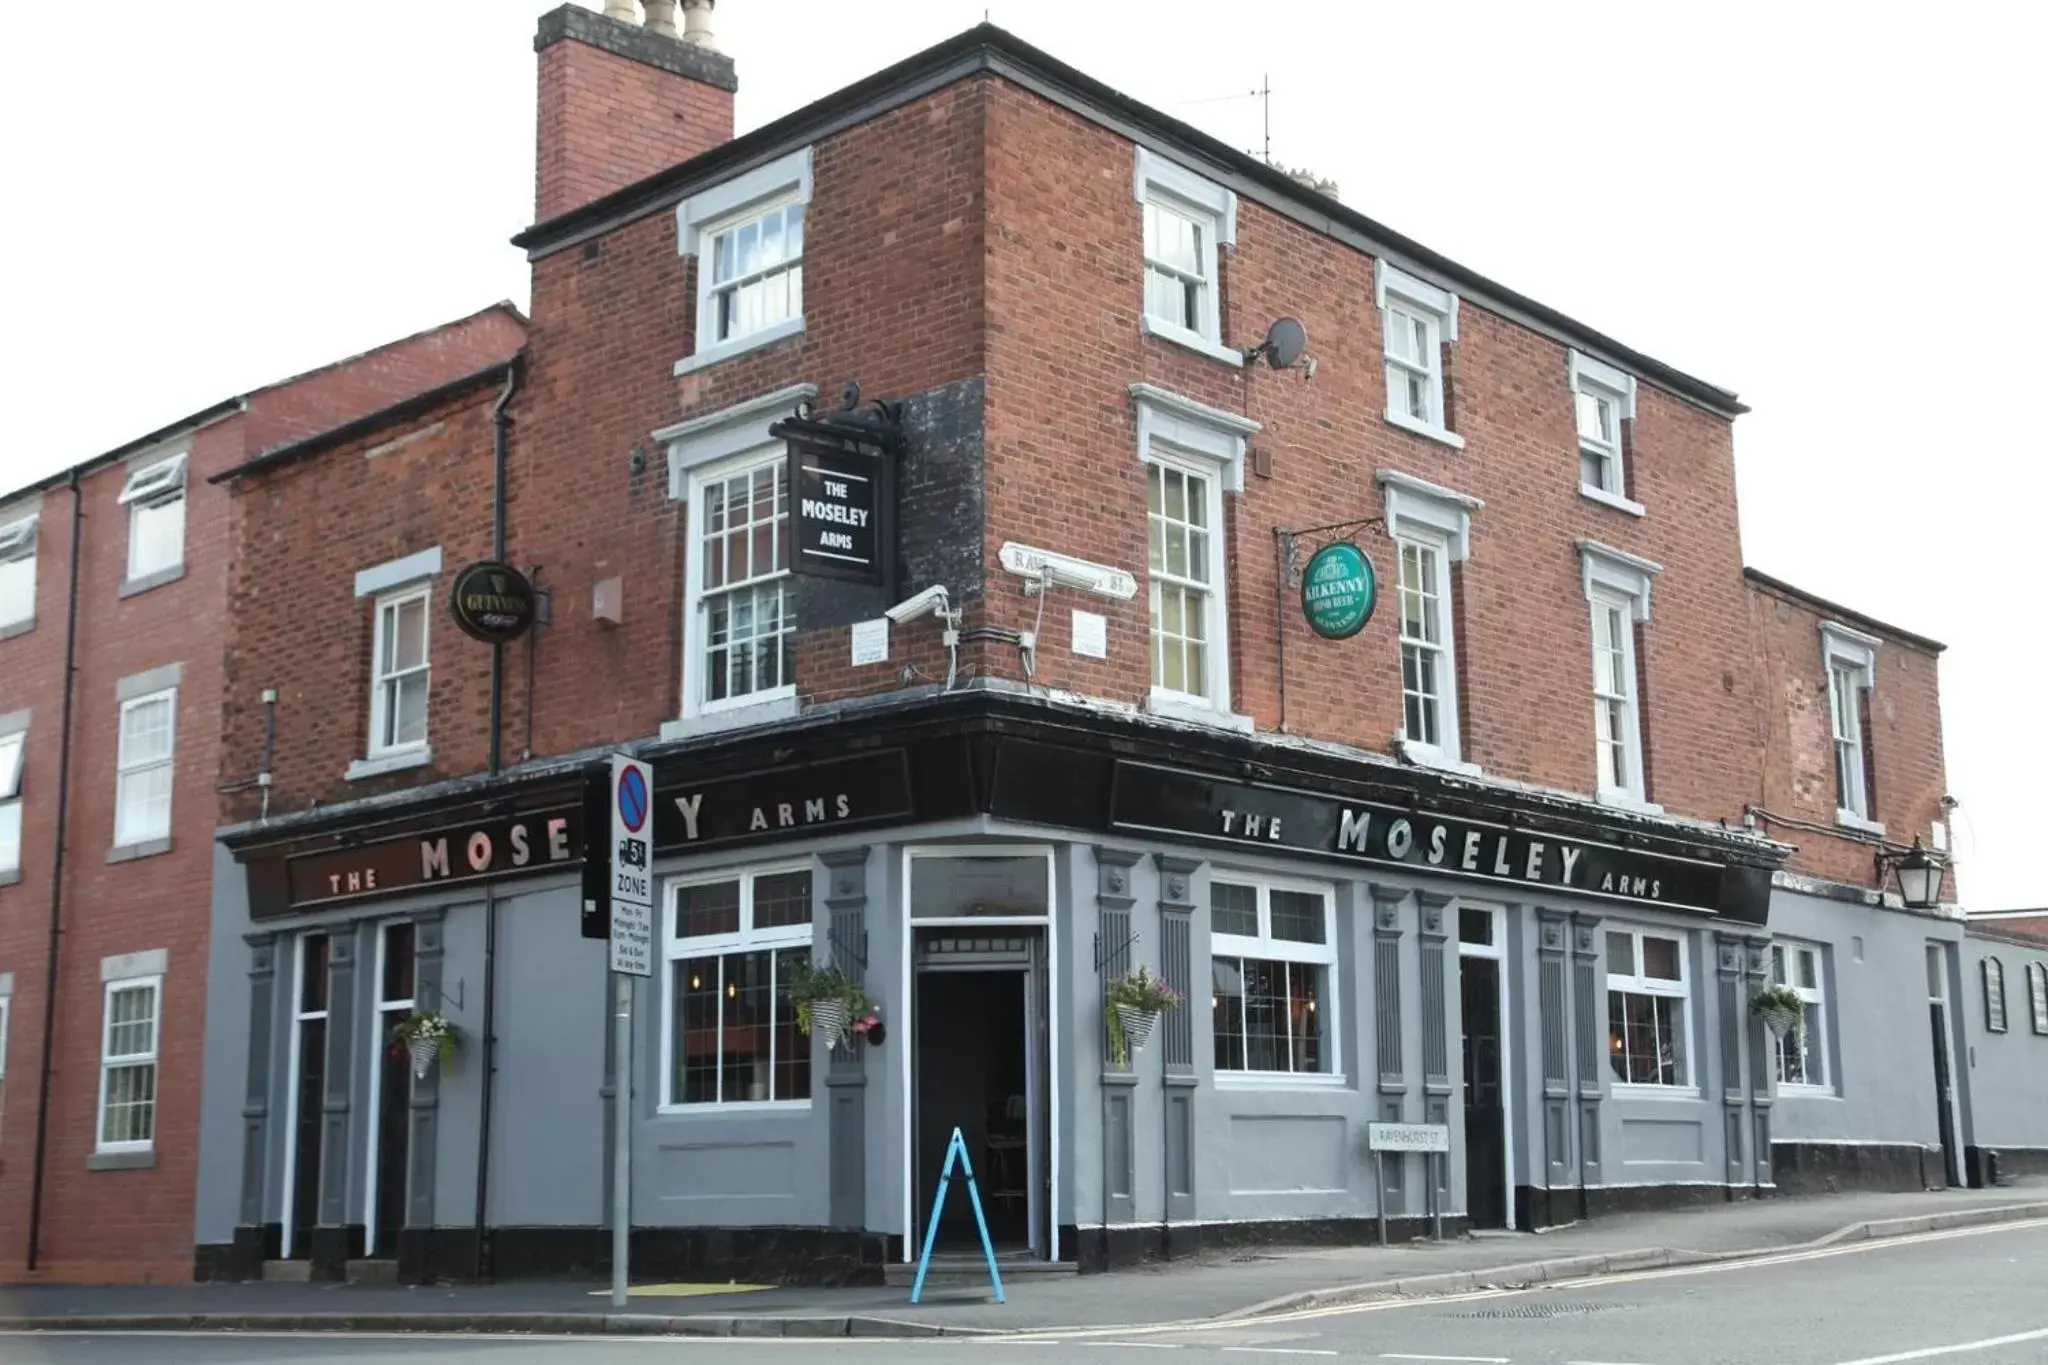 Property Building in The Moseley Arms